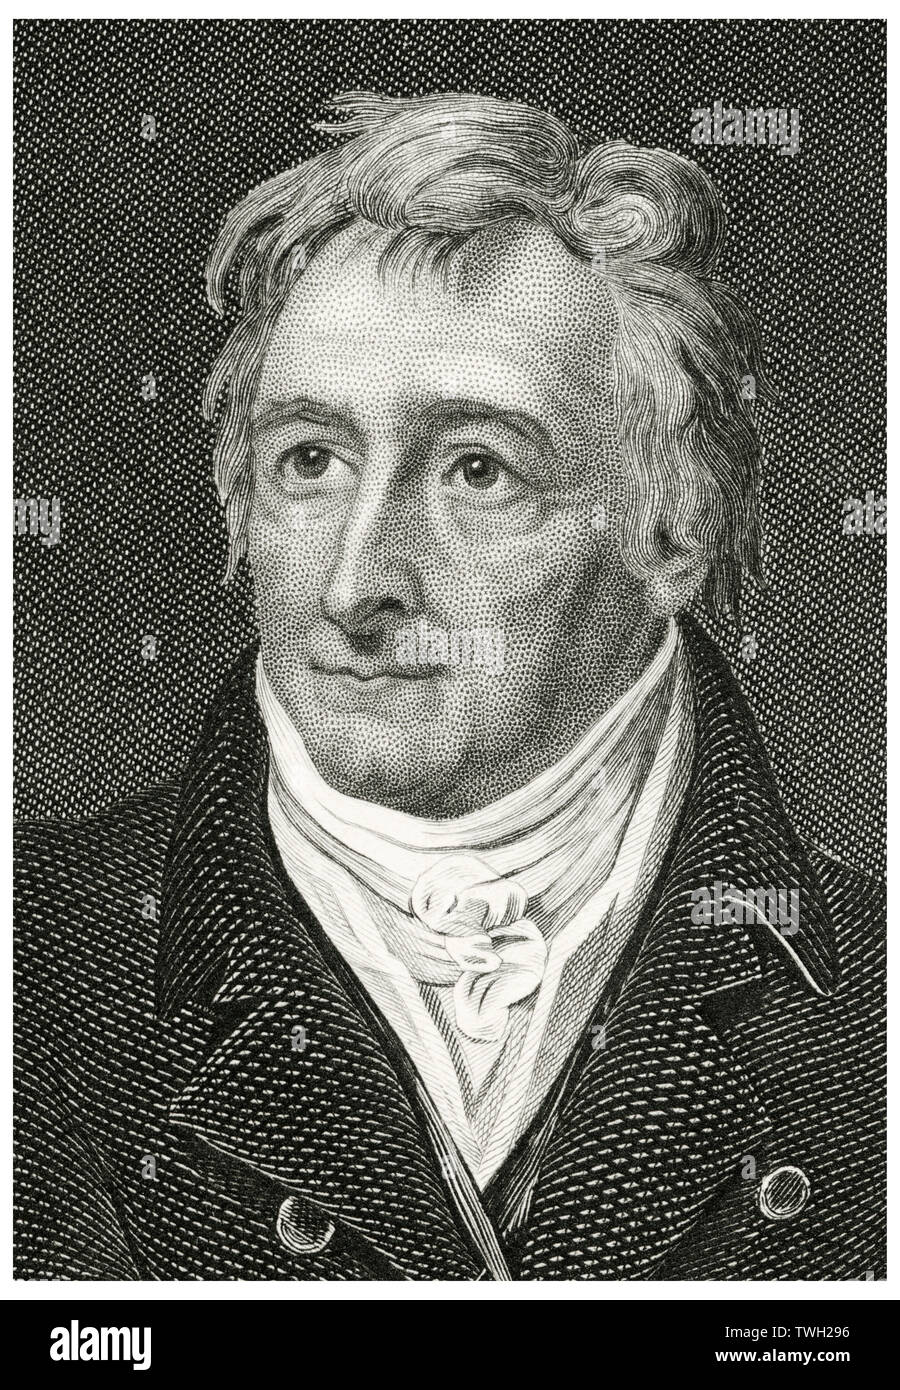 Henry Grattan (1746-1820), Irish Leader of the Patriot Movement that won Legislative Independence for Ireland in 1782, Head and Shoulders Portrait, Steel Engraving, Portrait Gallery of Eminent Men and Women of Europe and America by Evert A. Duyckinck, Published by Henry J. Johnson, Johnson, Wilson & Company, New York, 1873 Stock Photo